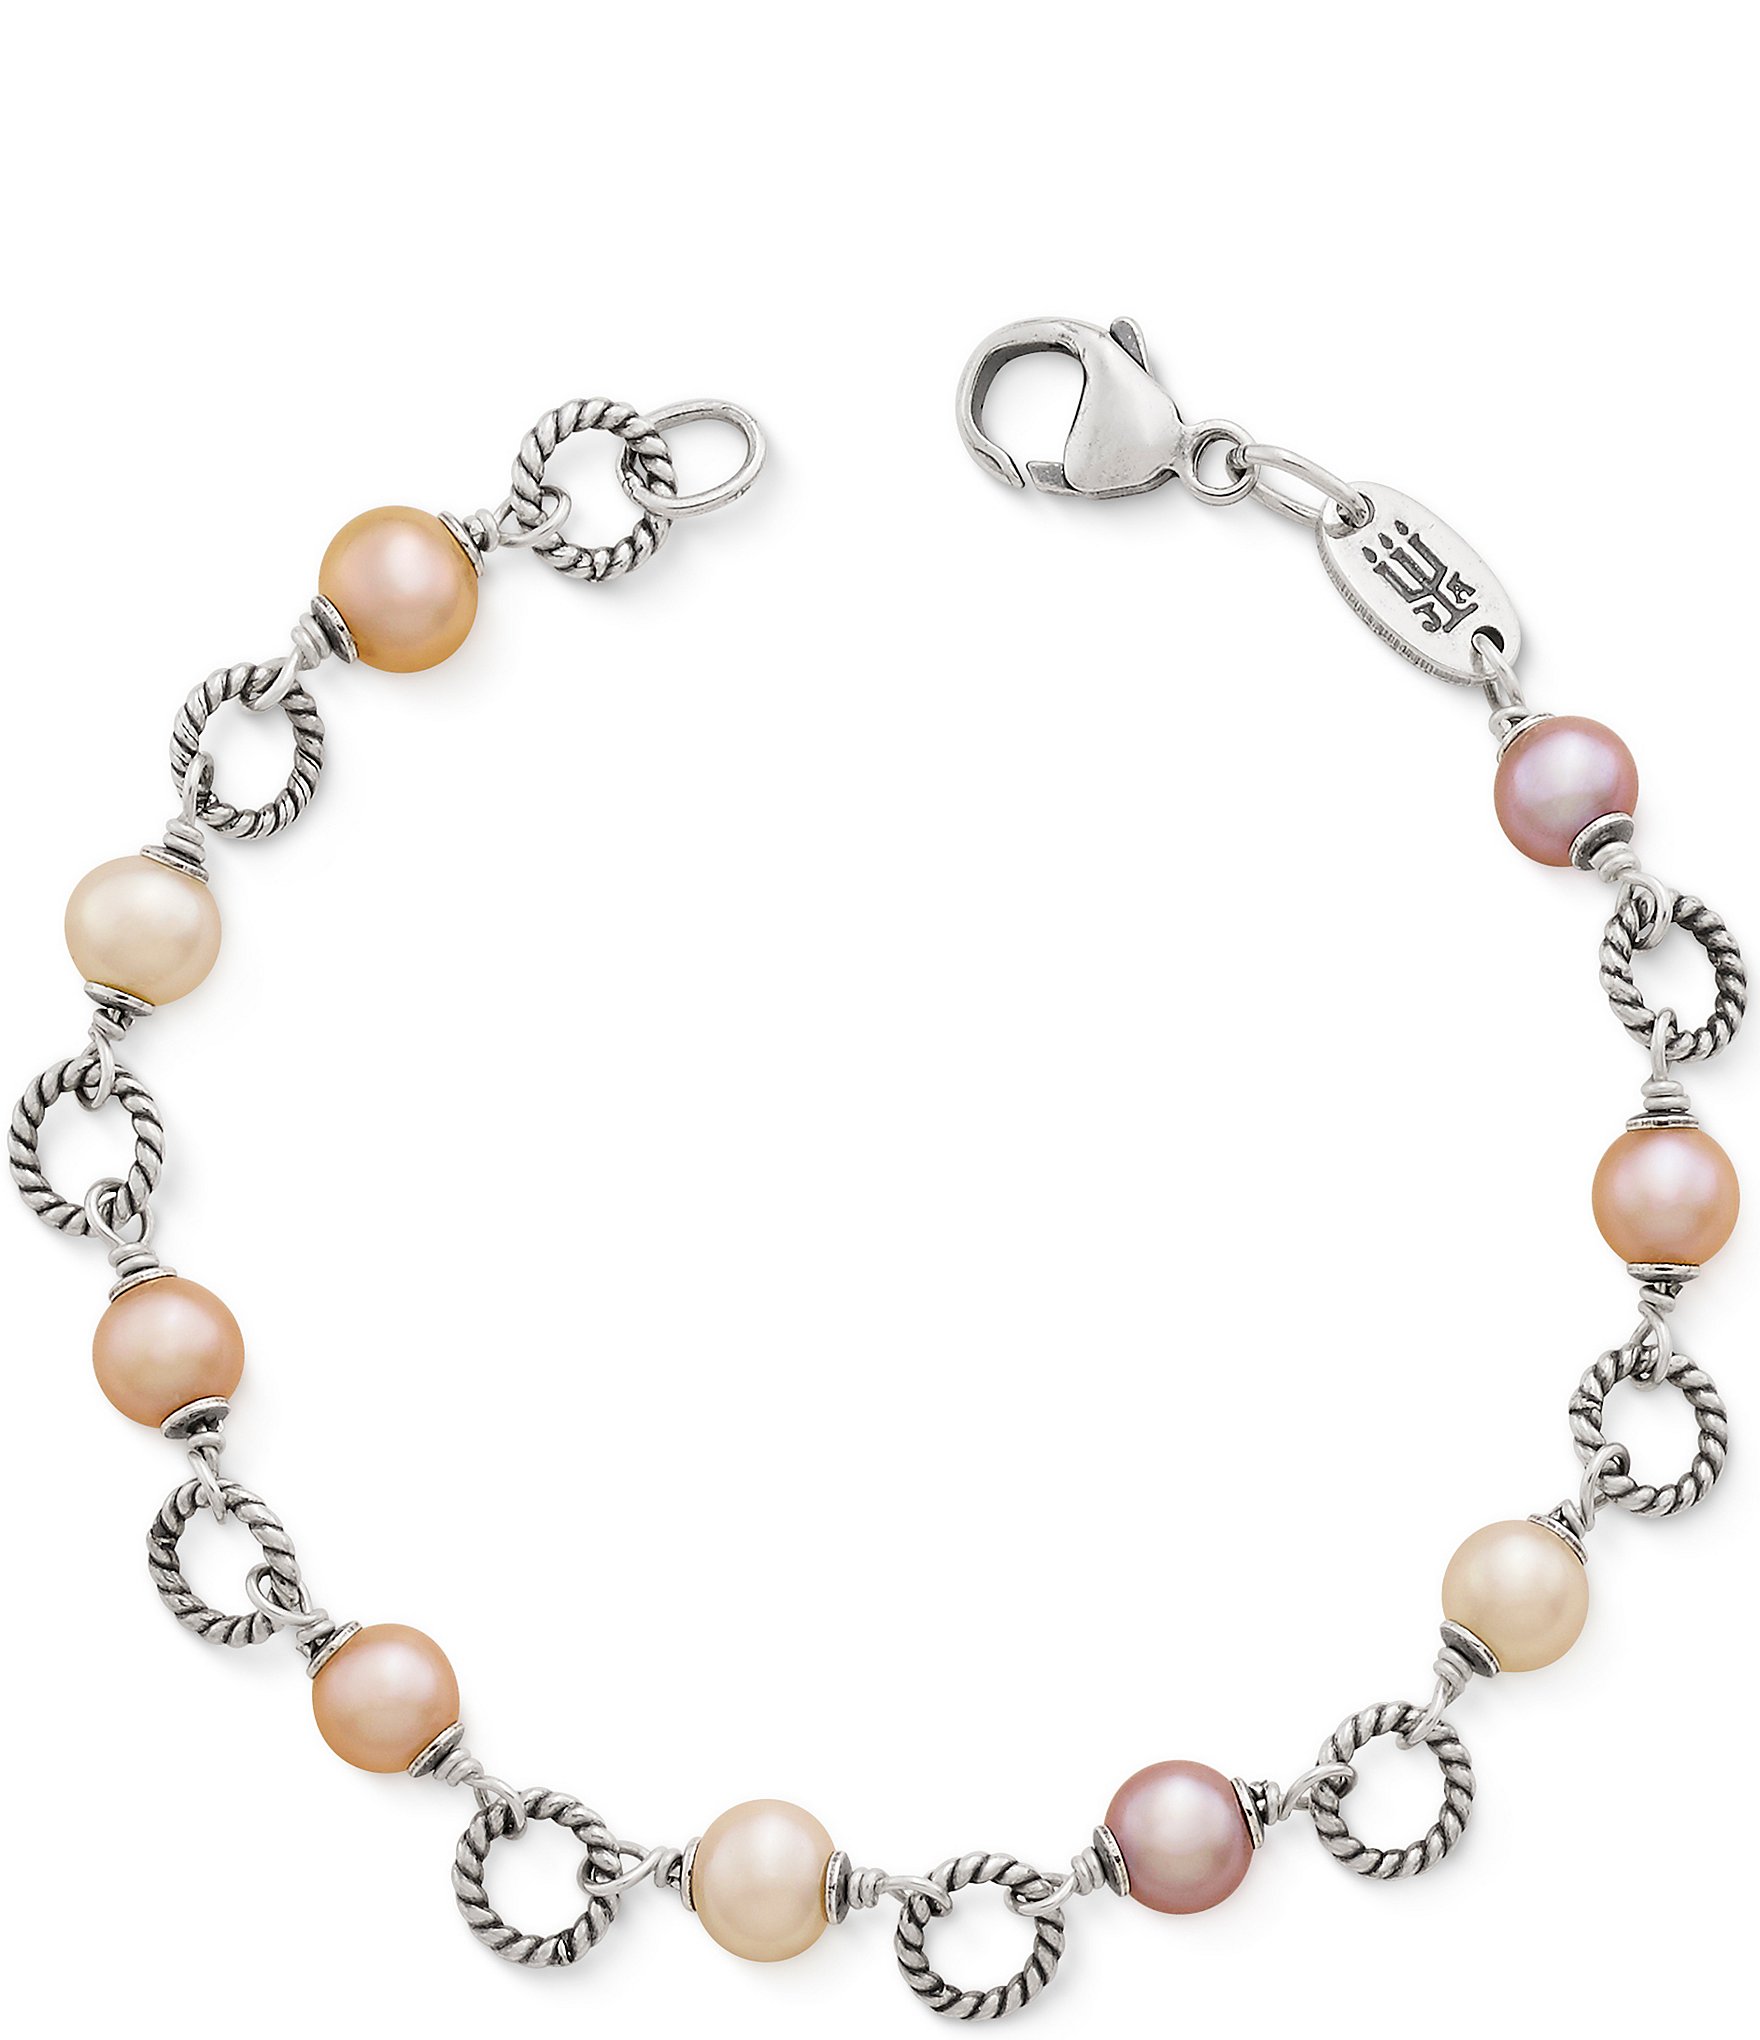 Twisted Wire Link Bracelet with Multi-Colored Cultured Pearls